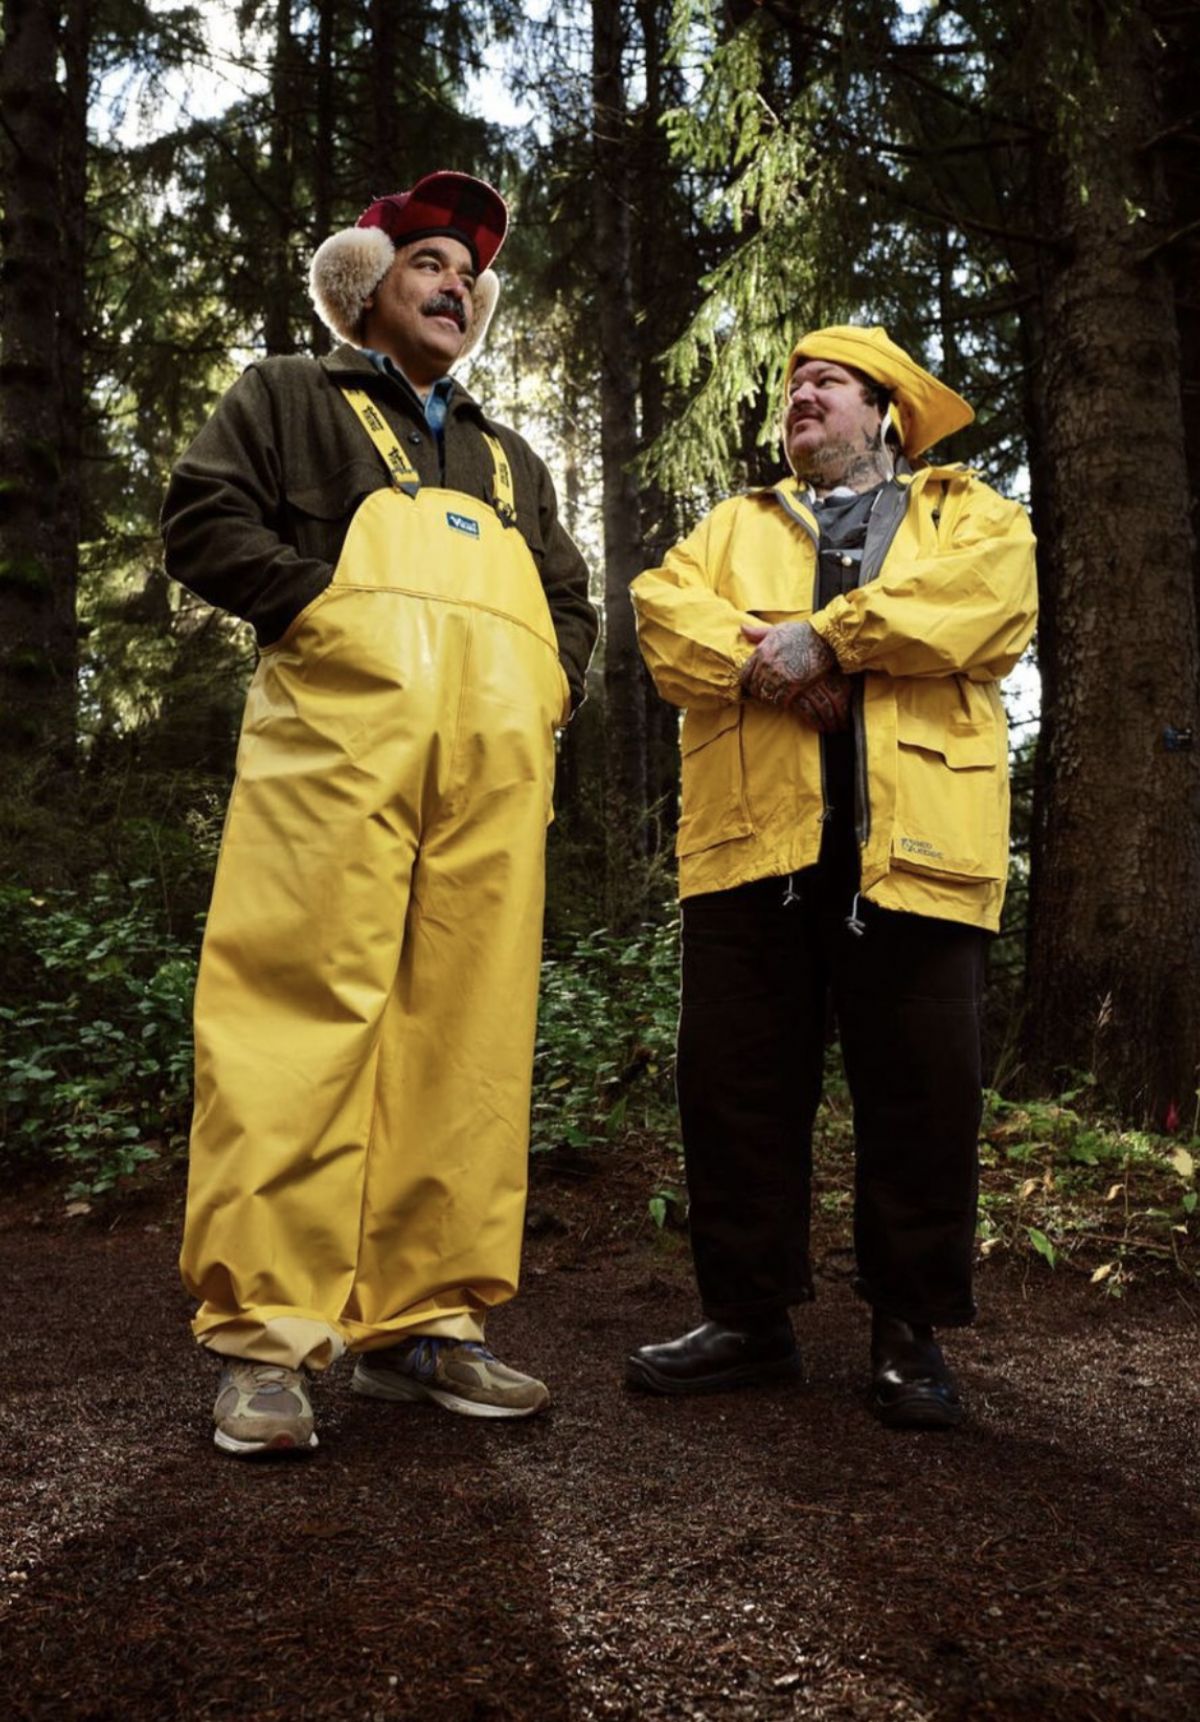 Matty Matheson and Alex 2tone standing in Portland forest with yellow rain gear on.